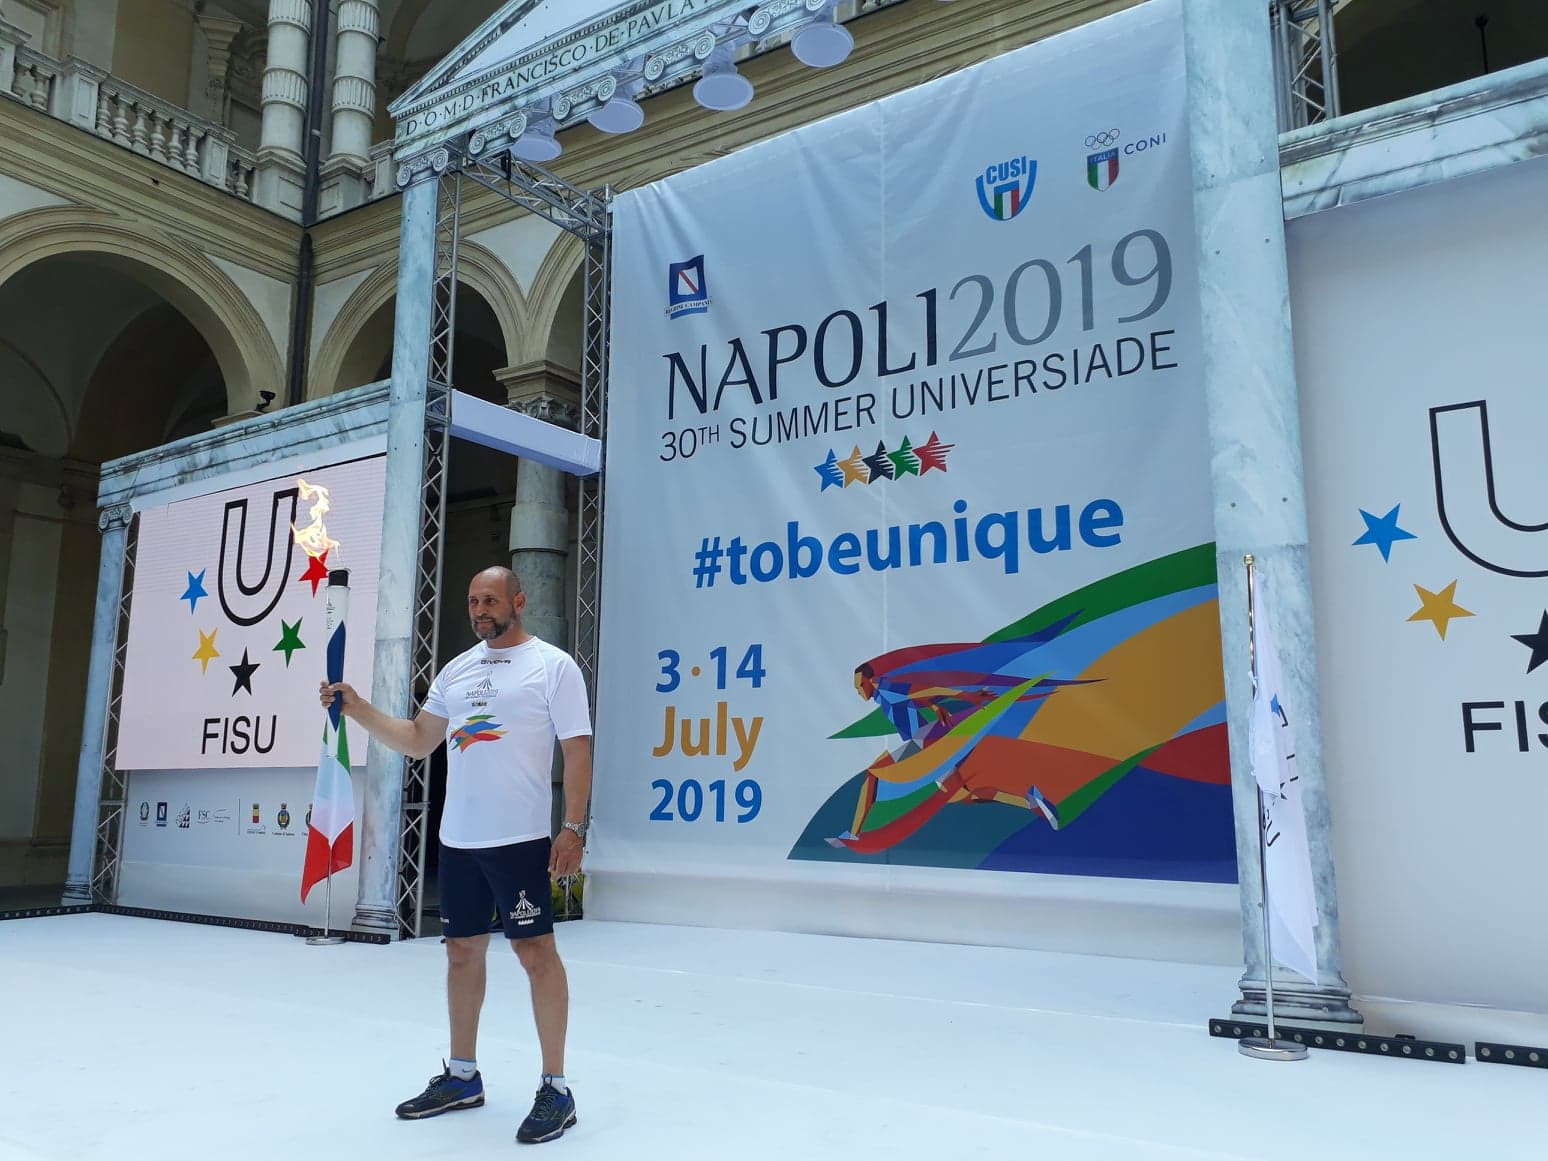 Italian double Olympic rowing champion Davide Tizzano began the Torch Relay for the Naples 2019 Summer Universiade ©ITG